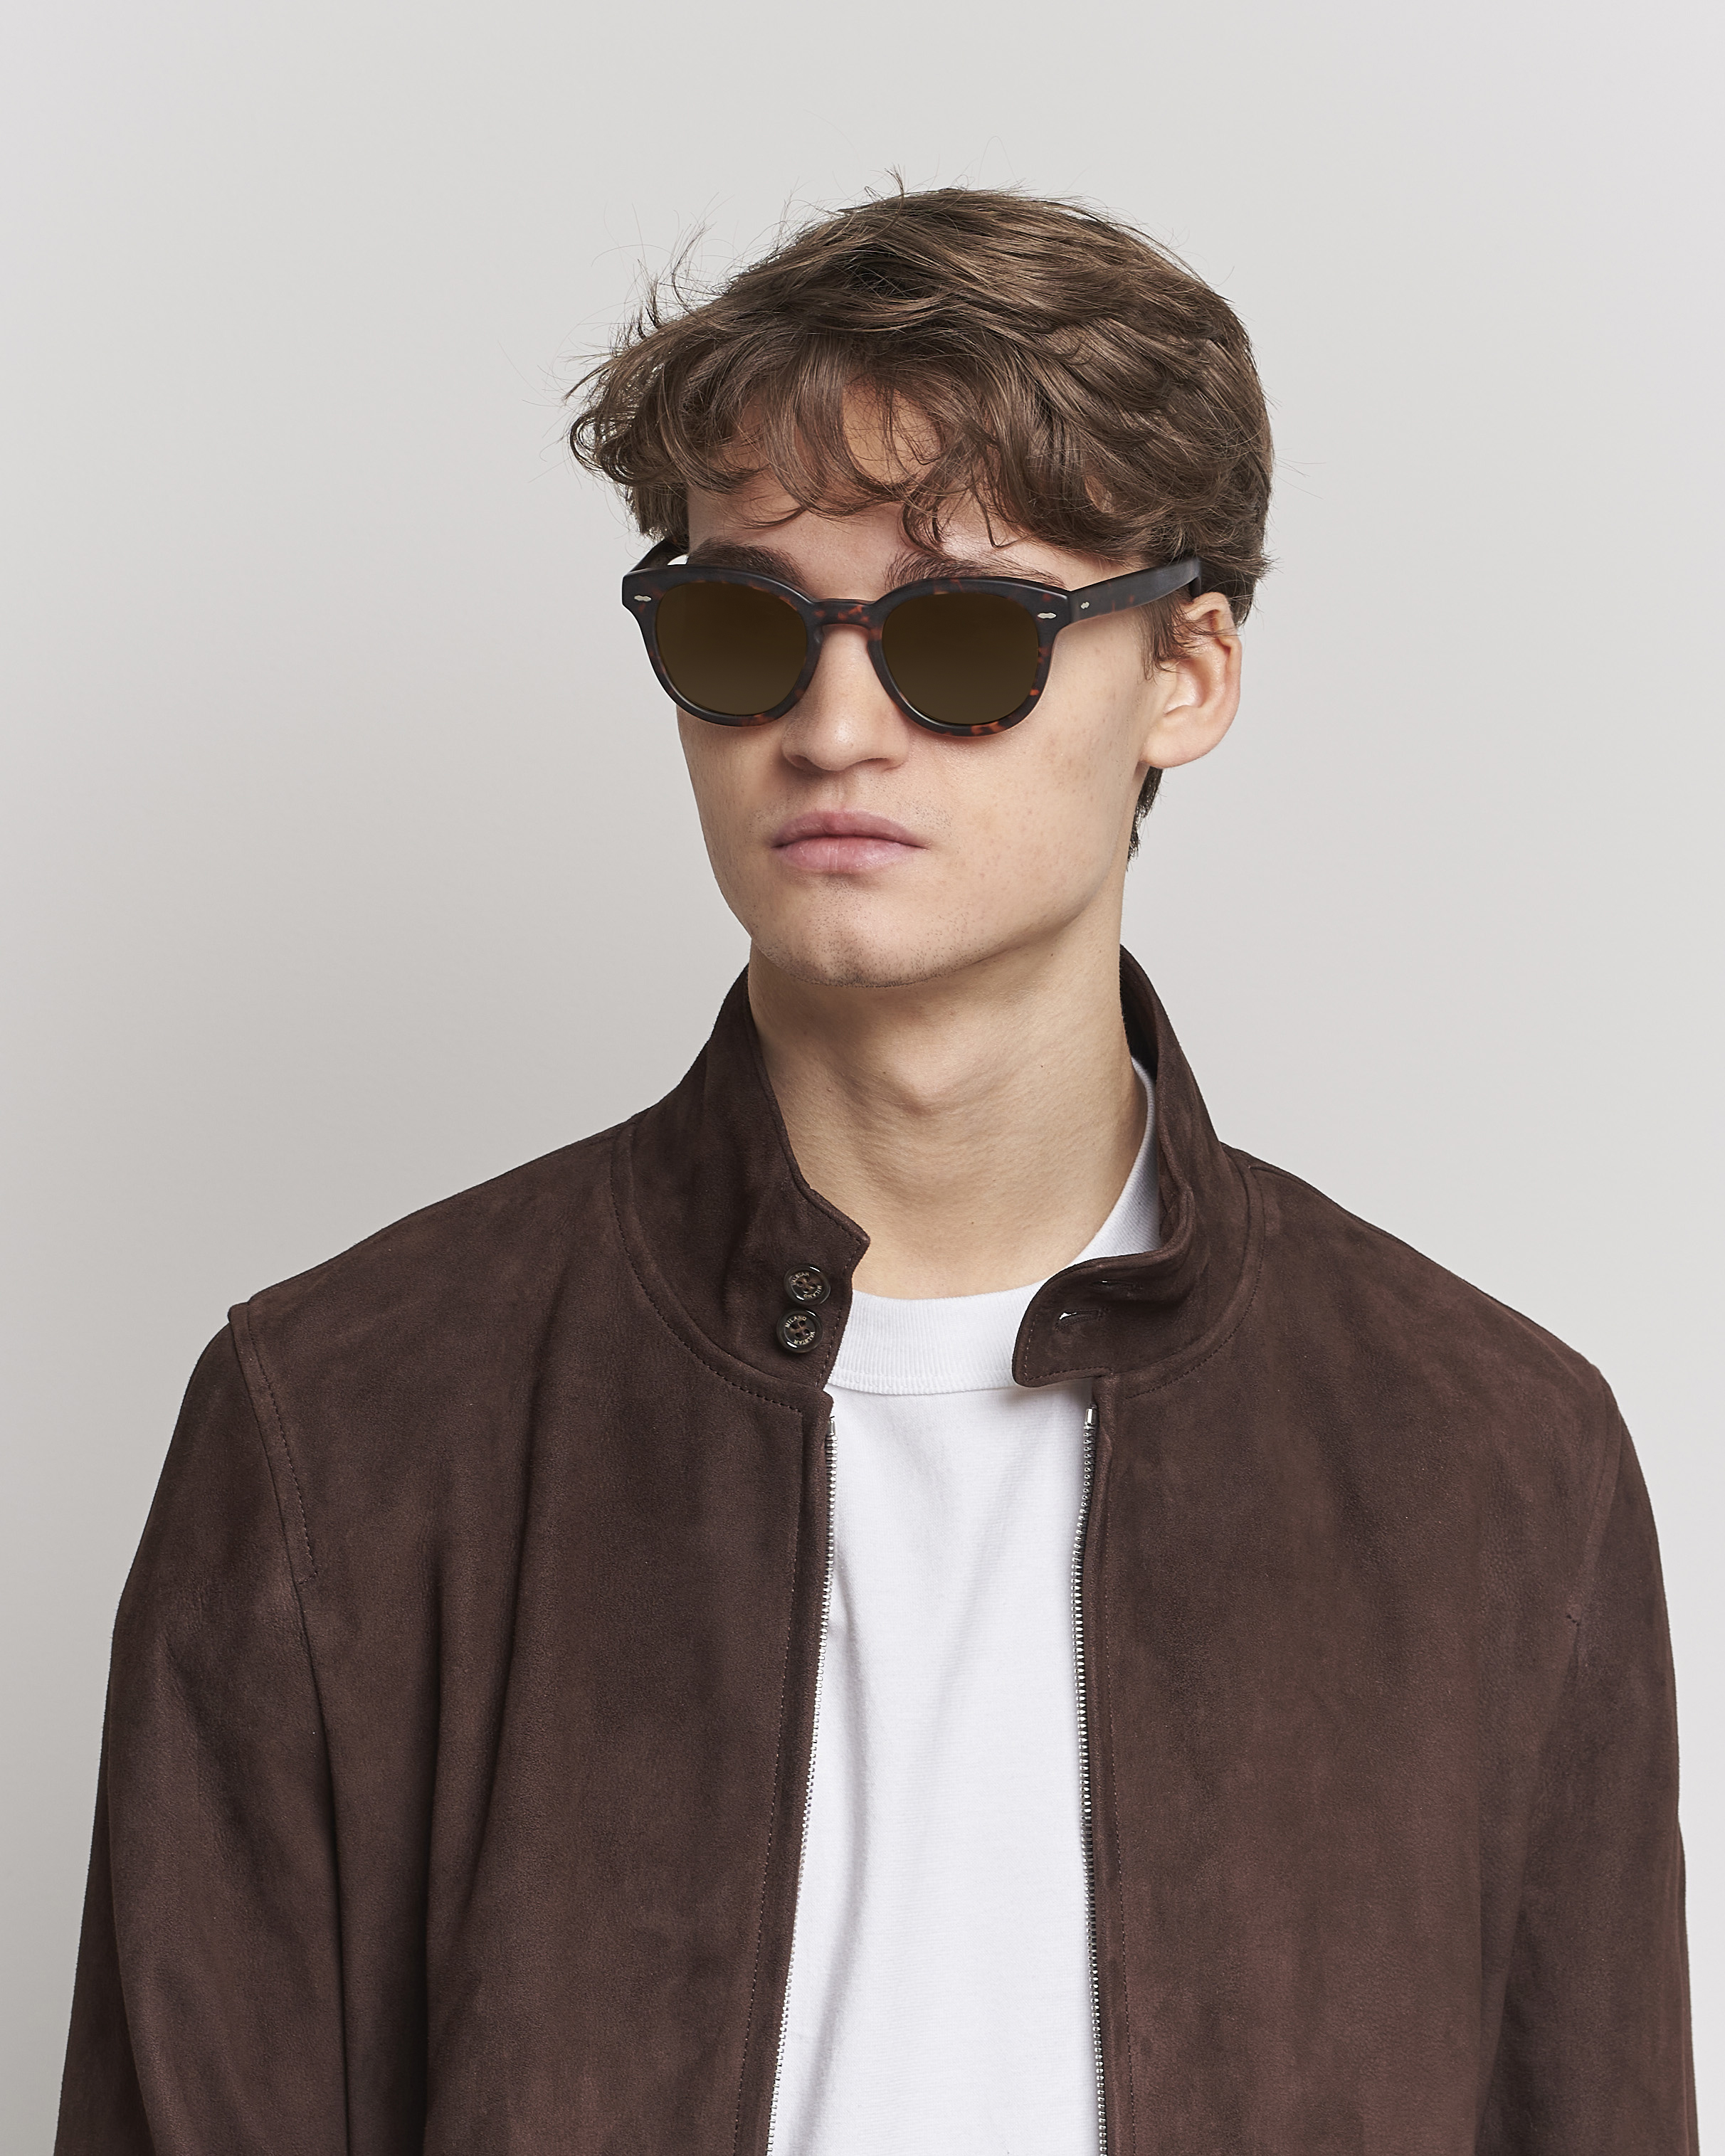 Hombres | Accesorios | Oliver Peoples | Cary Grant Sunglasses Semi Matte Tortoise